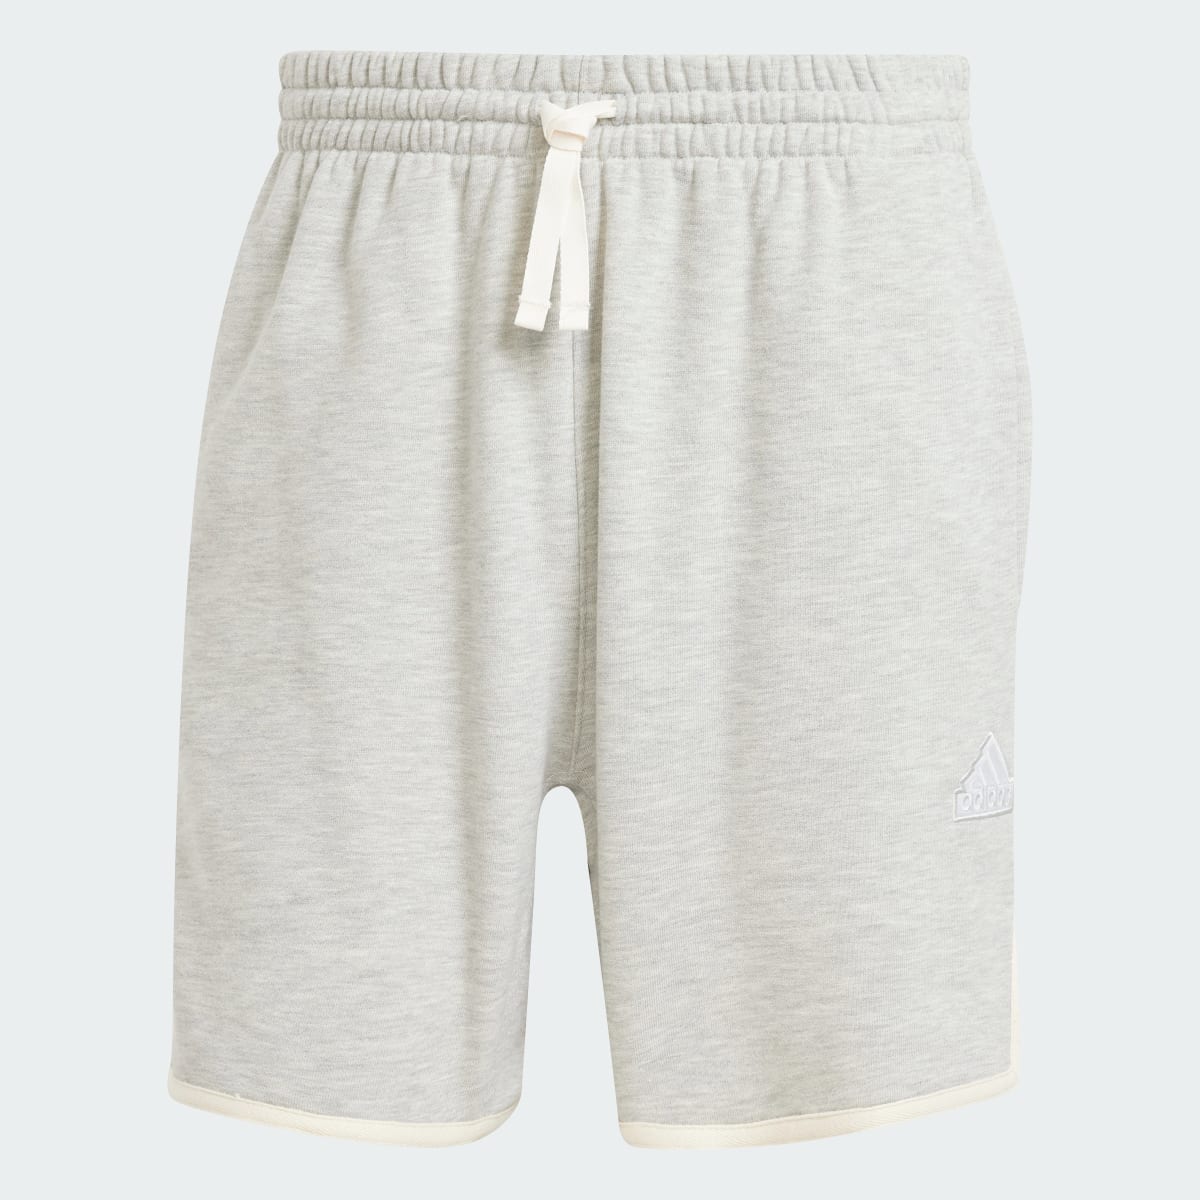 Adidas Lounge French Terry Colored Mélange Shorts. 4